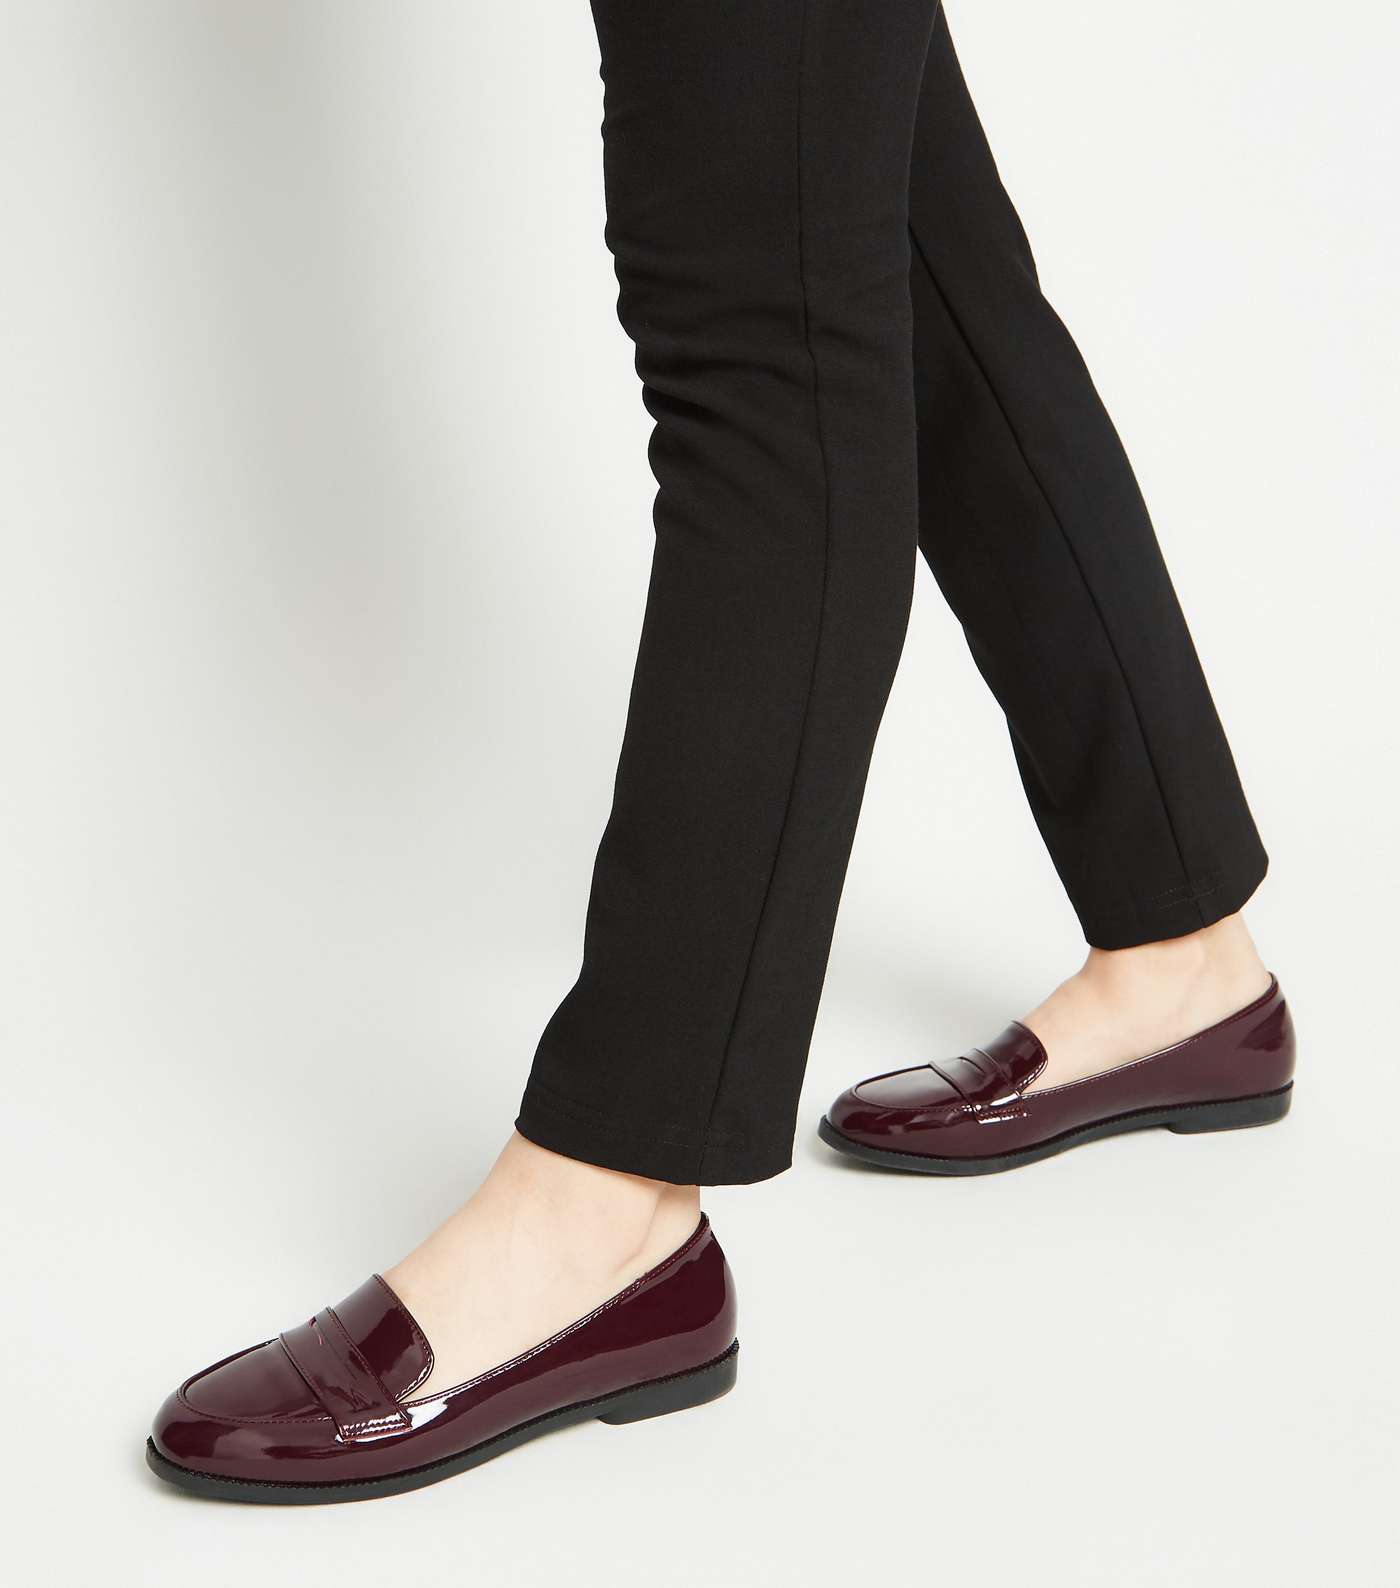 Girls Burgundy Patent Penny Loafers Image 2